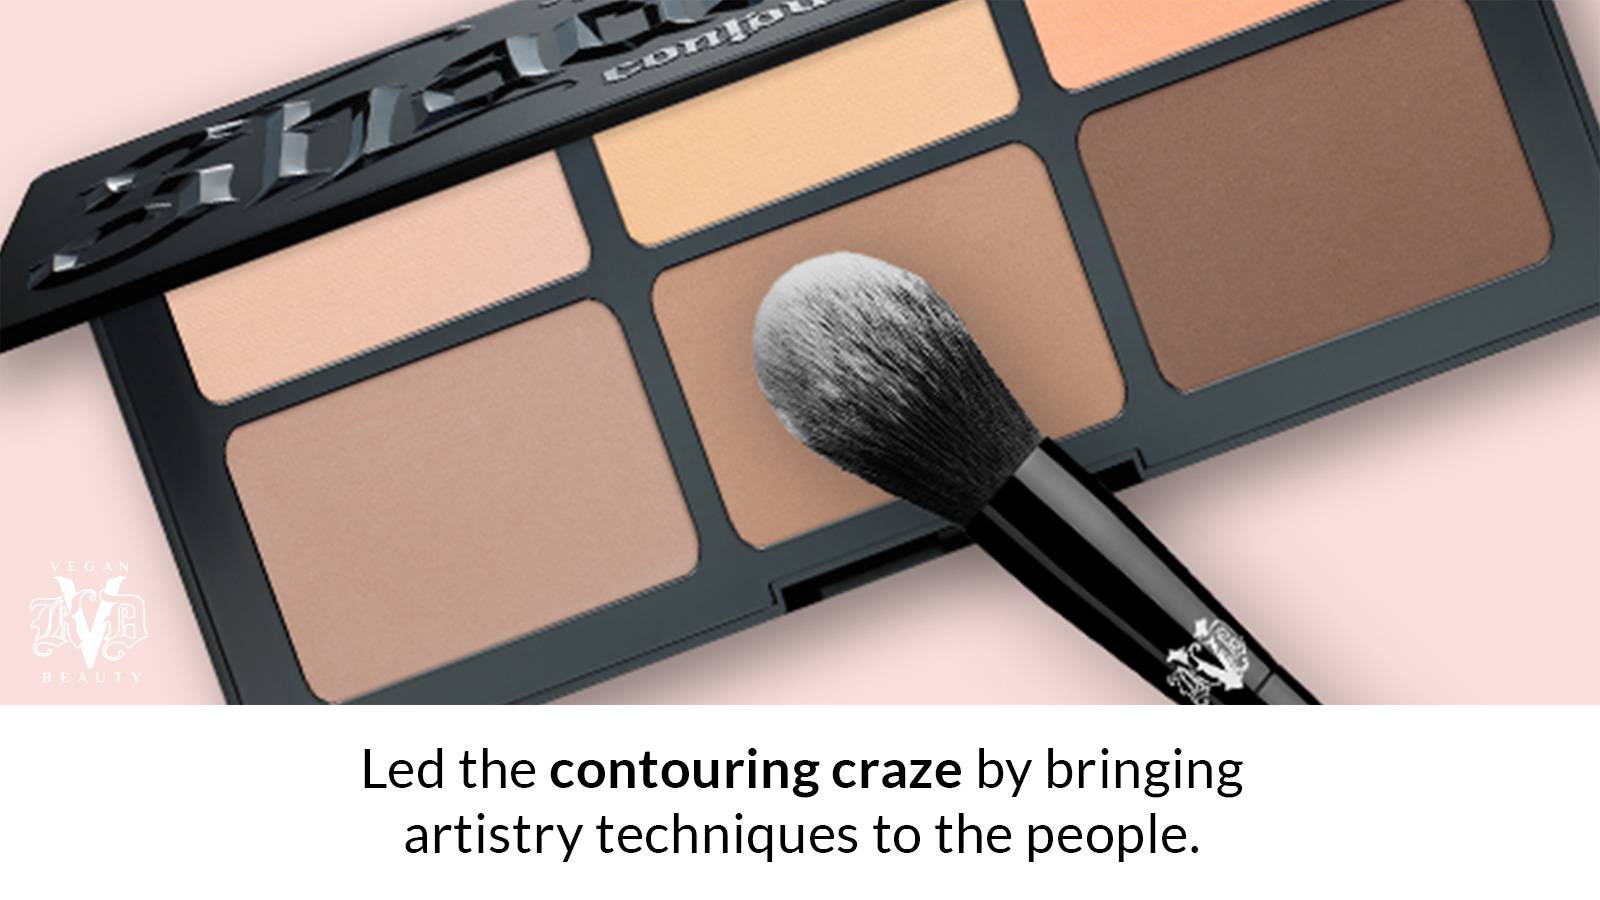 Led the contouring craze by bringing artistry techniques to the people.